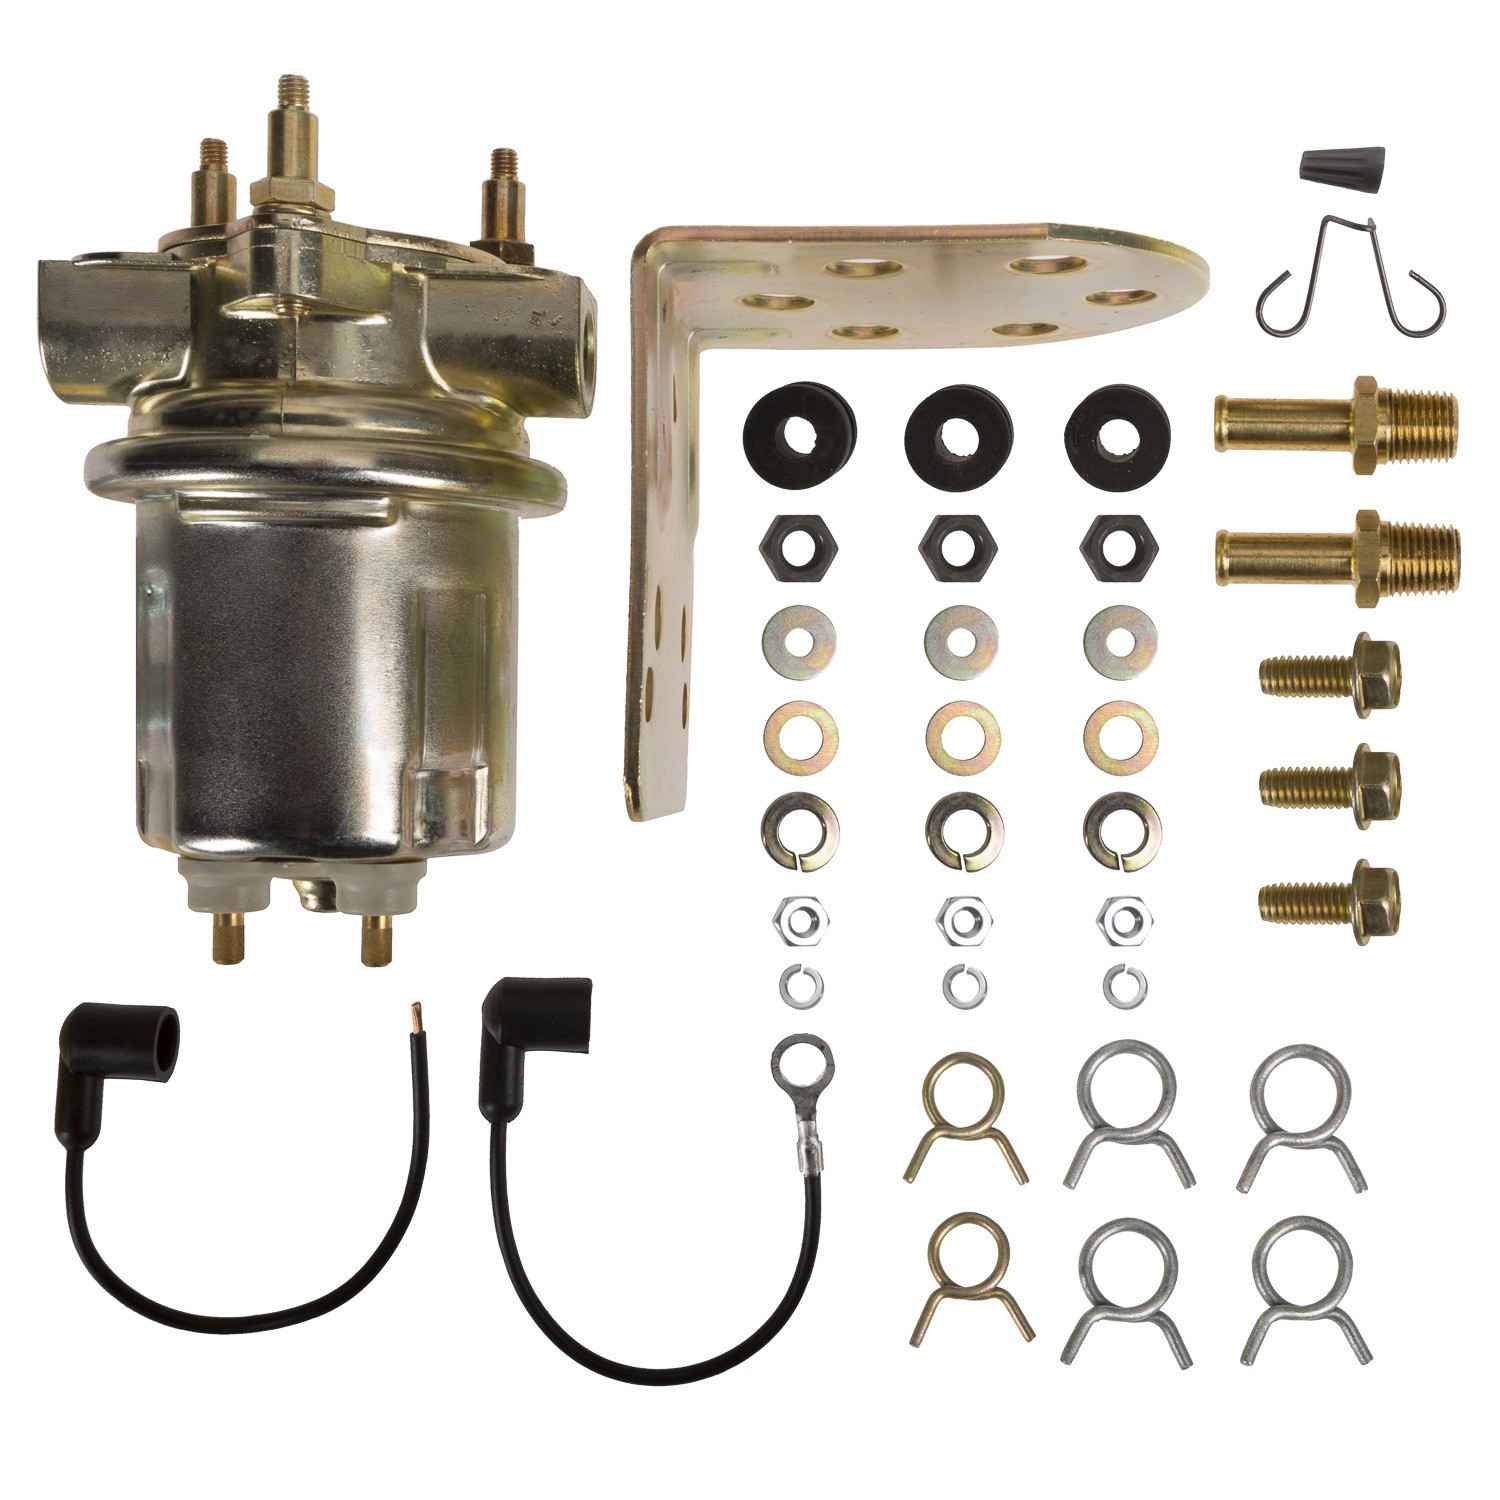 Kit View of Electric Fuel Pump CARTER P4259